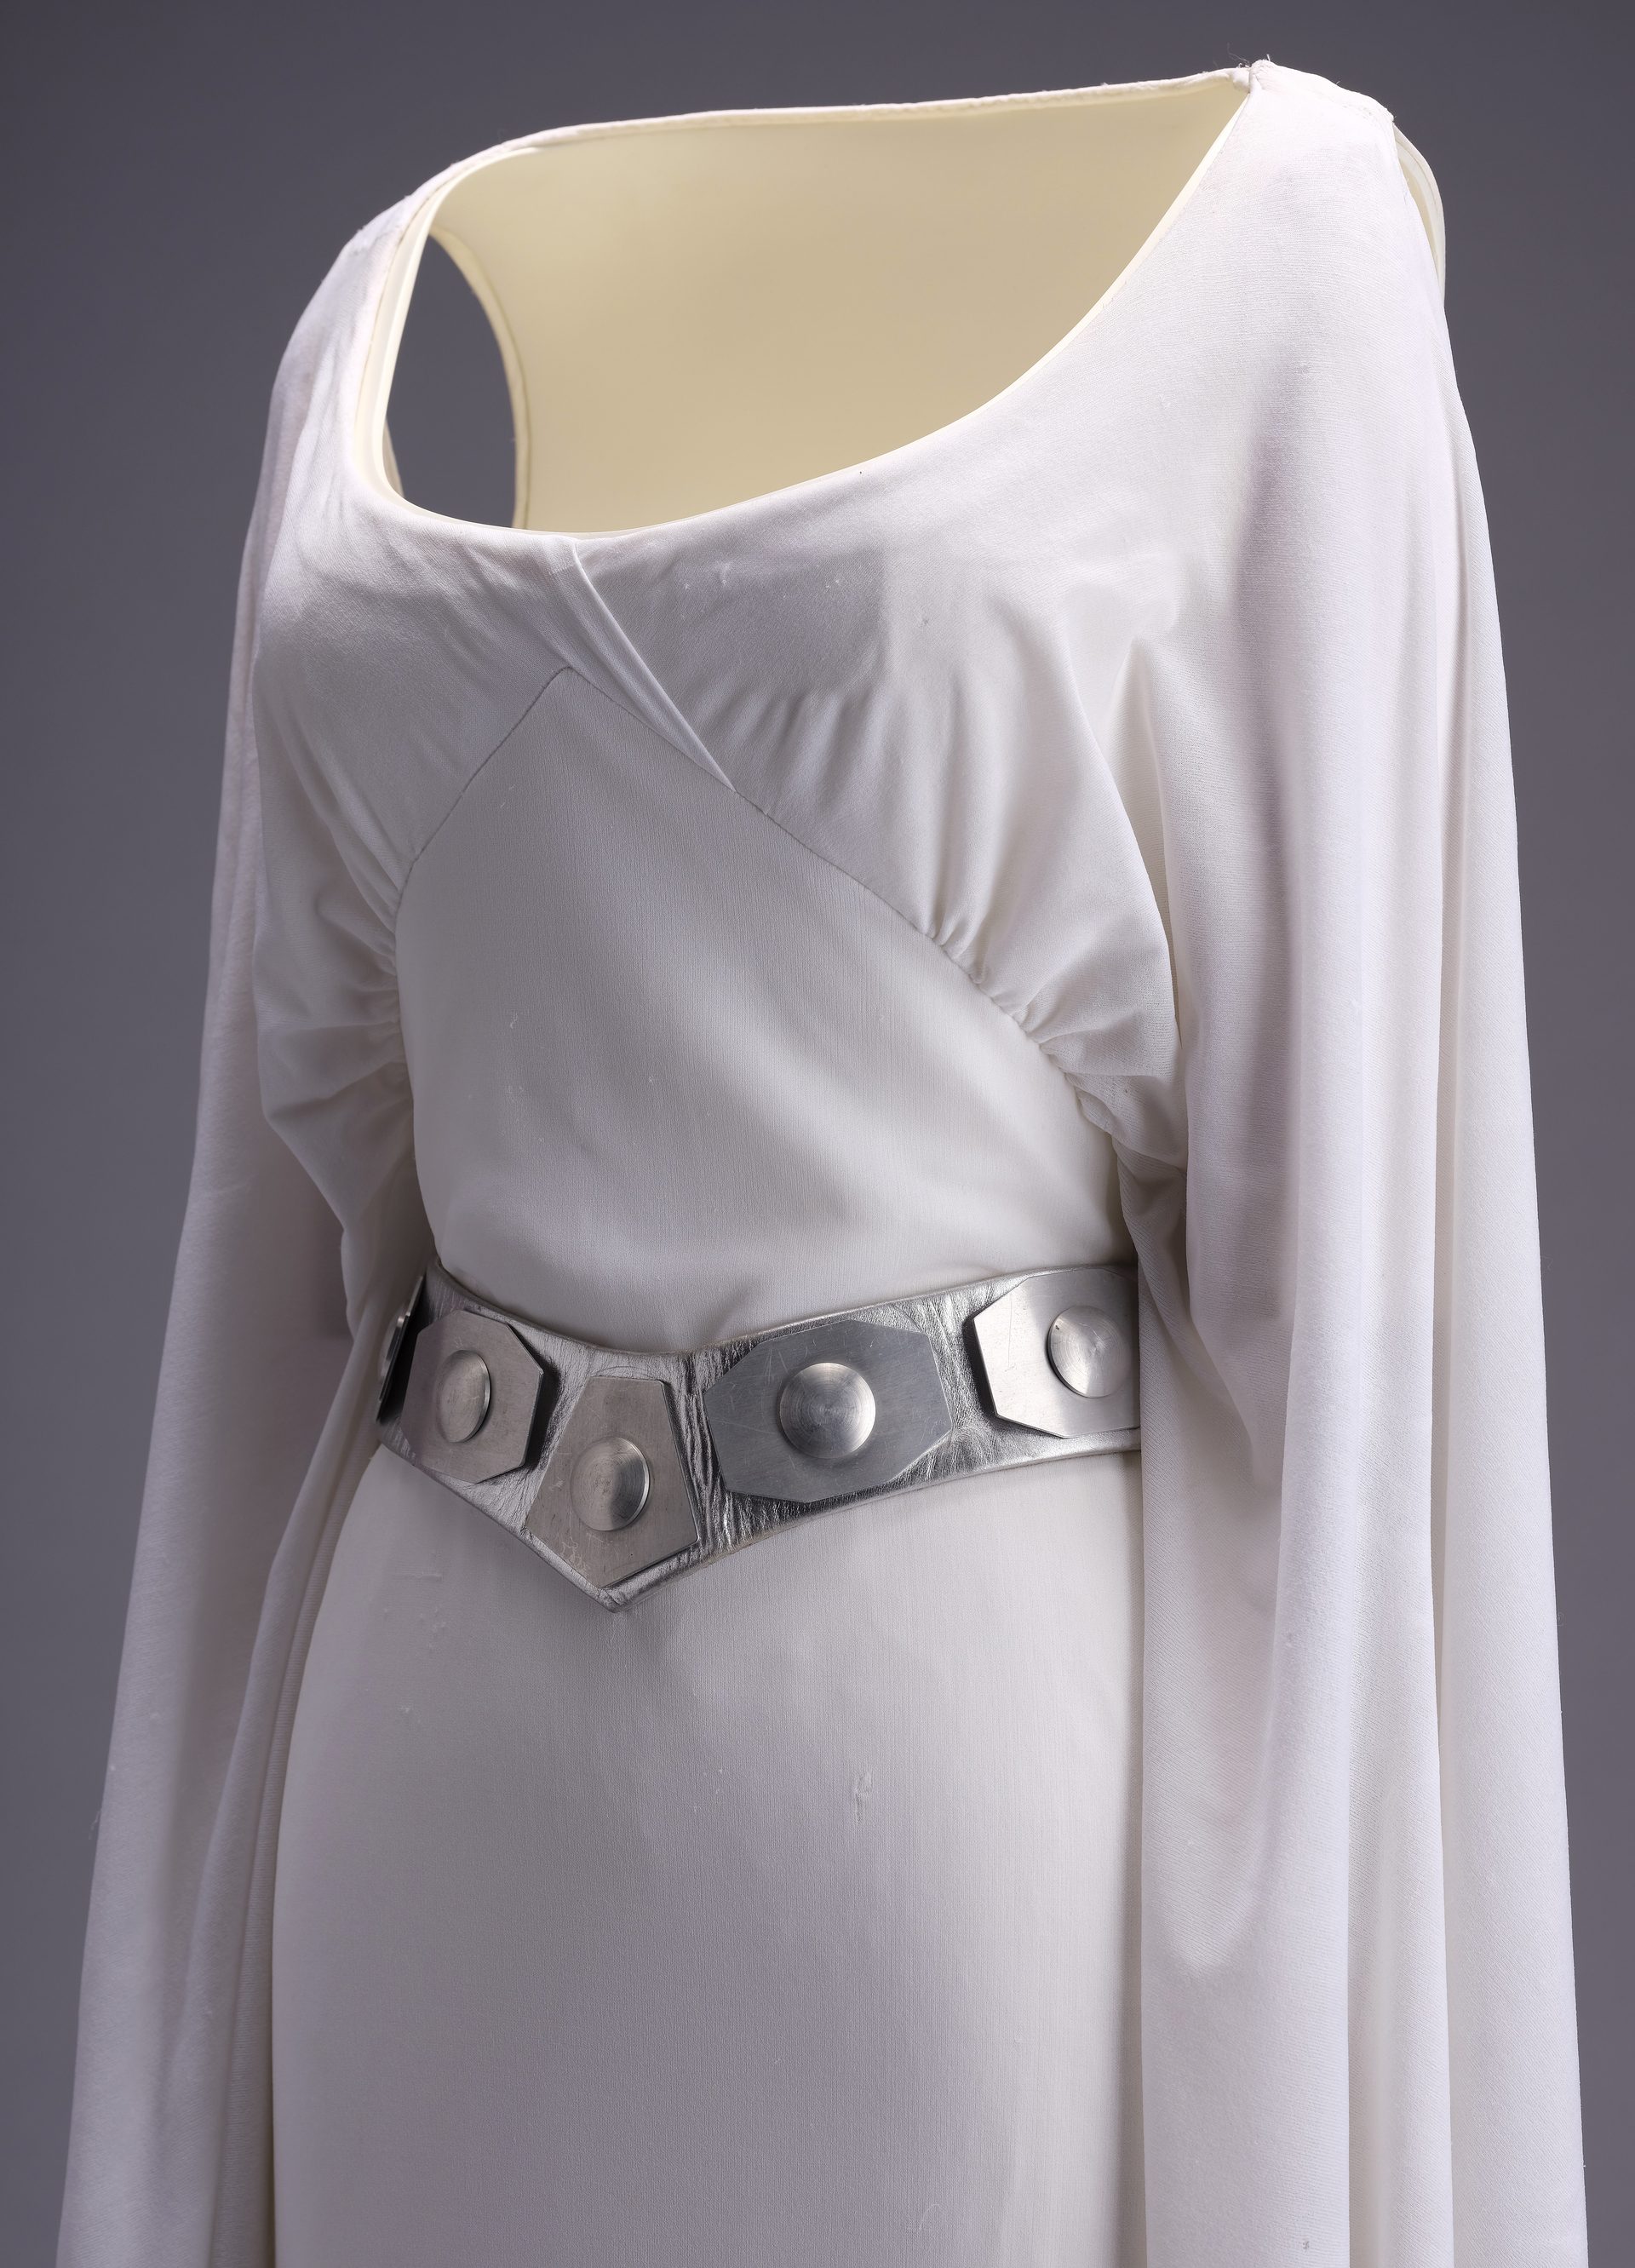 STAR WARS: A NEW HOPE (1977) - Princess Leia's (Carrie Fisher) Screen-Matched Ceremonial Dress - Image 26 of 39